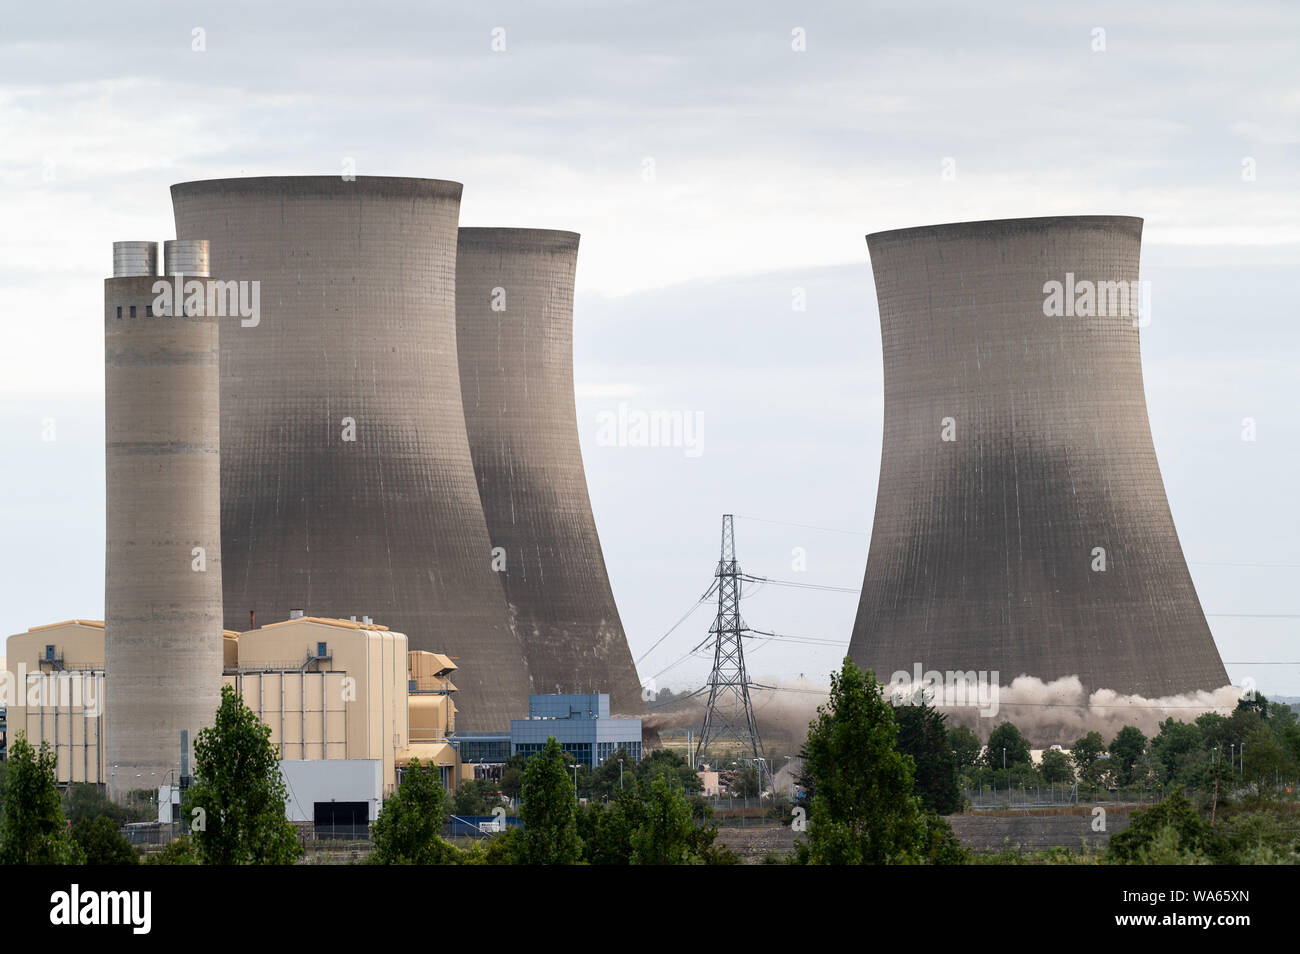 Didcot, Oxfordshire, UK. 18th Aug, 2019. The last three cooling towers are demolished with controlled explosions. Andrew Walmsley/Alamy Live News Credit: Andrew Walmsley/Alamy Live News Stock Photo